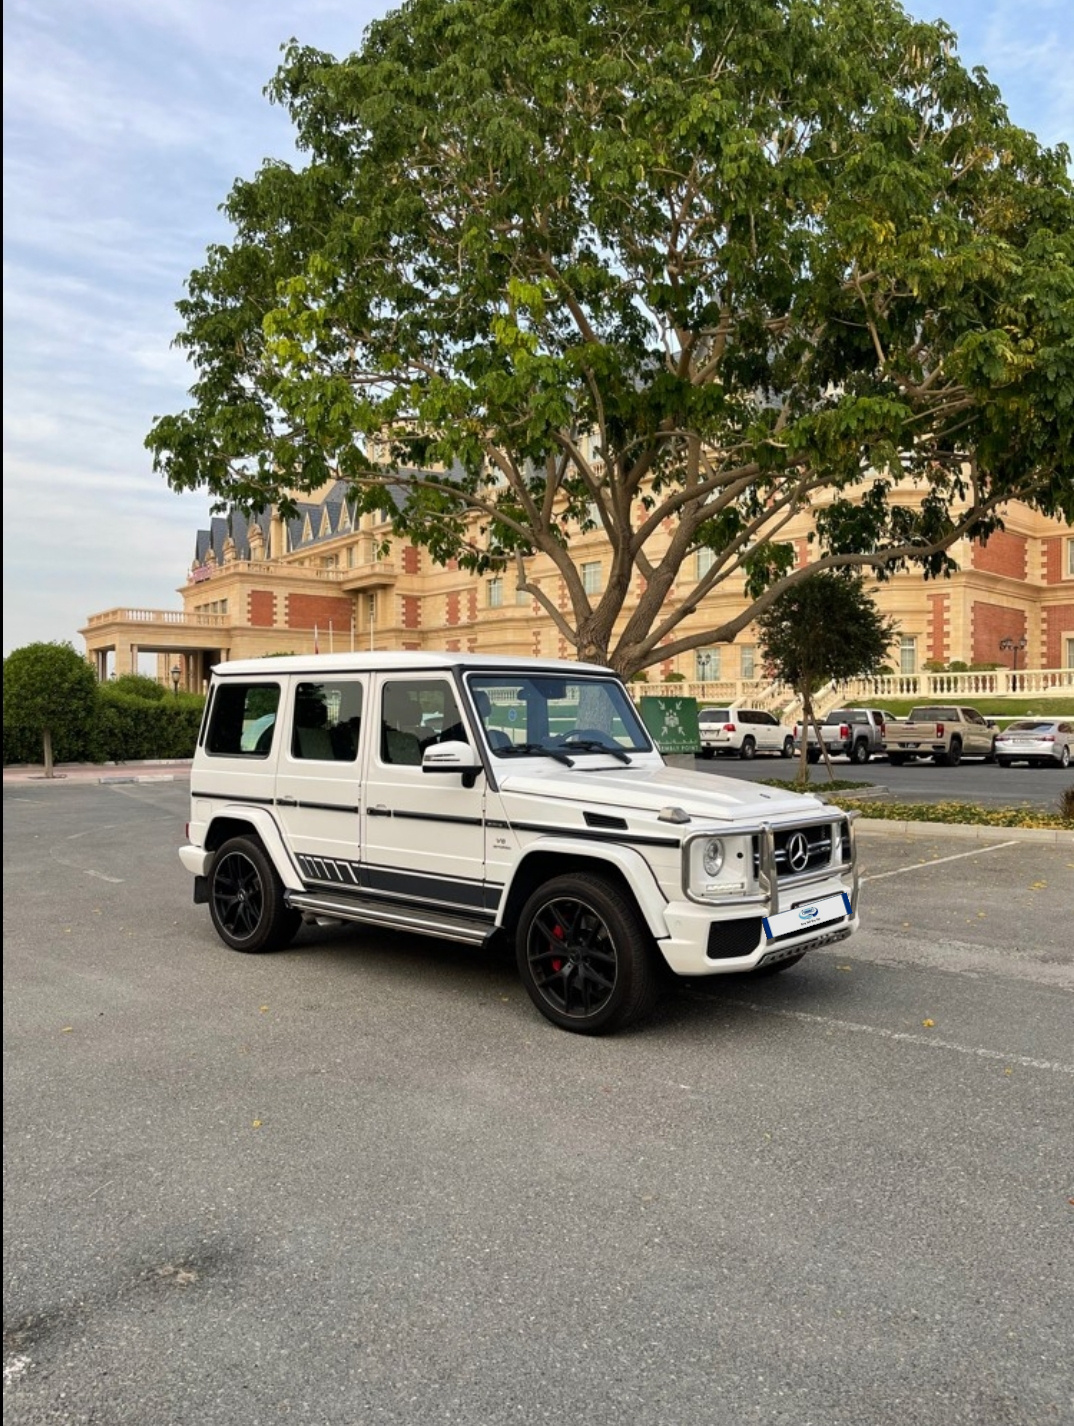 Mercedes G-Wagen: What Makes It So Special